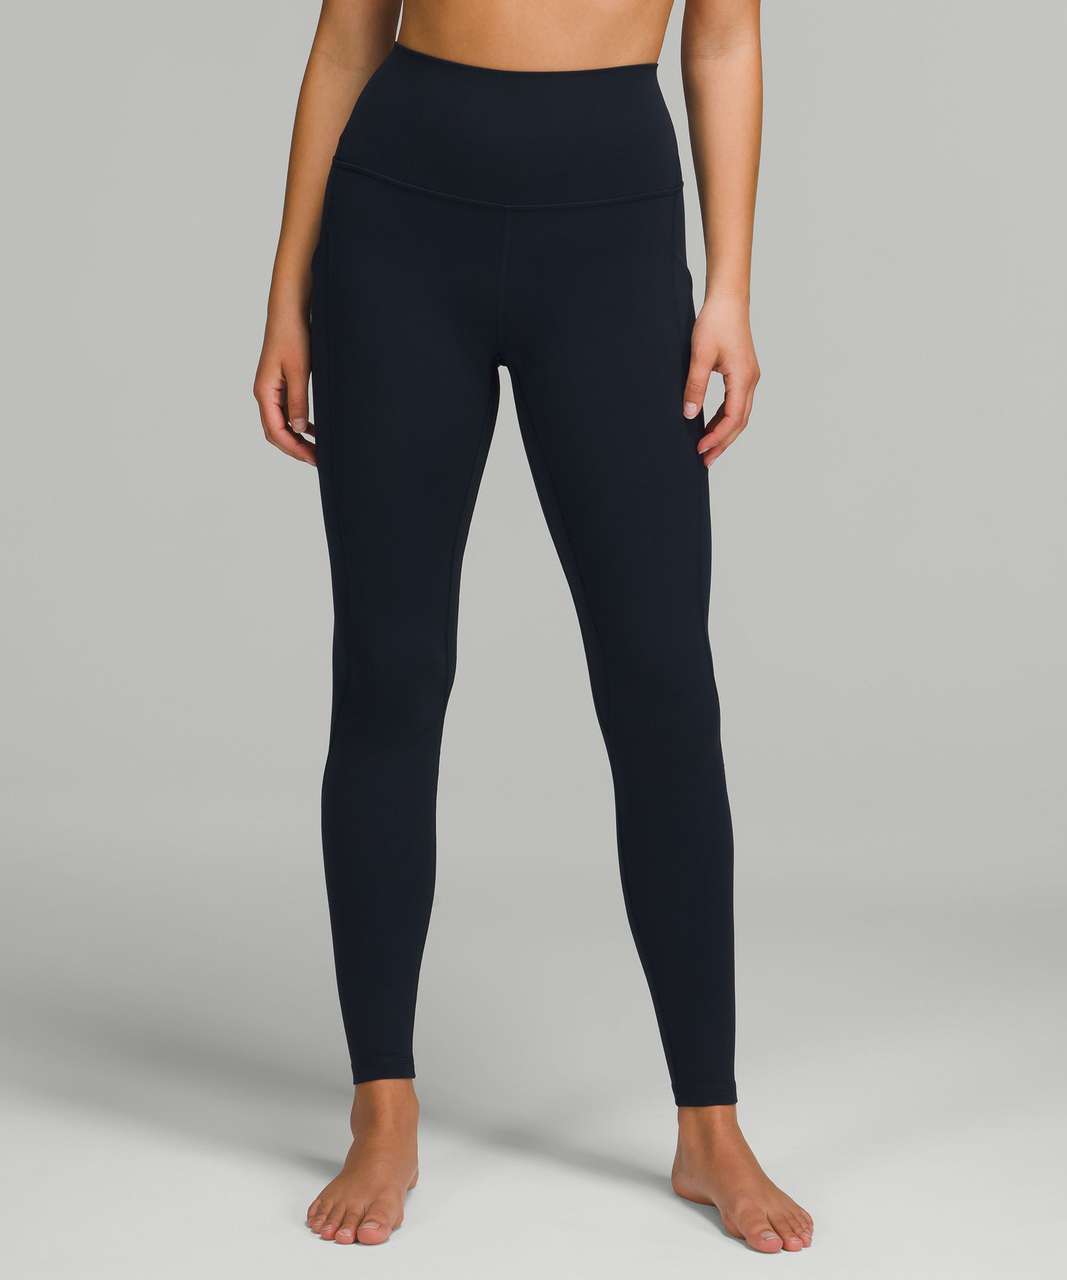 Lululemon Align High-Rise Pant with Pockets 28" - True Navy